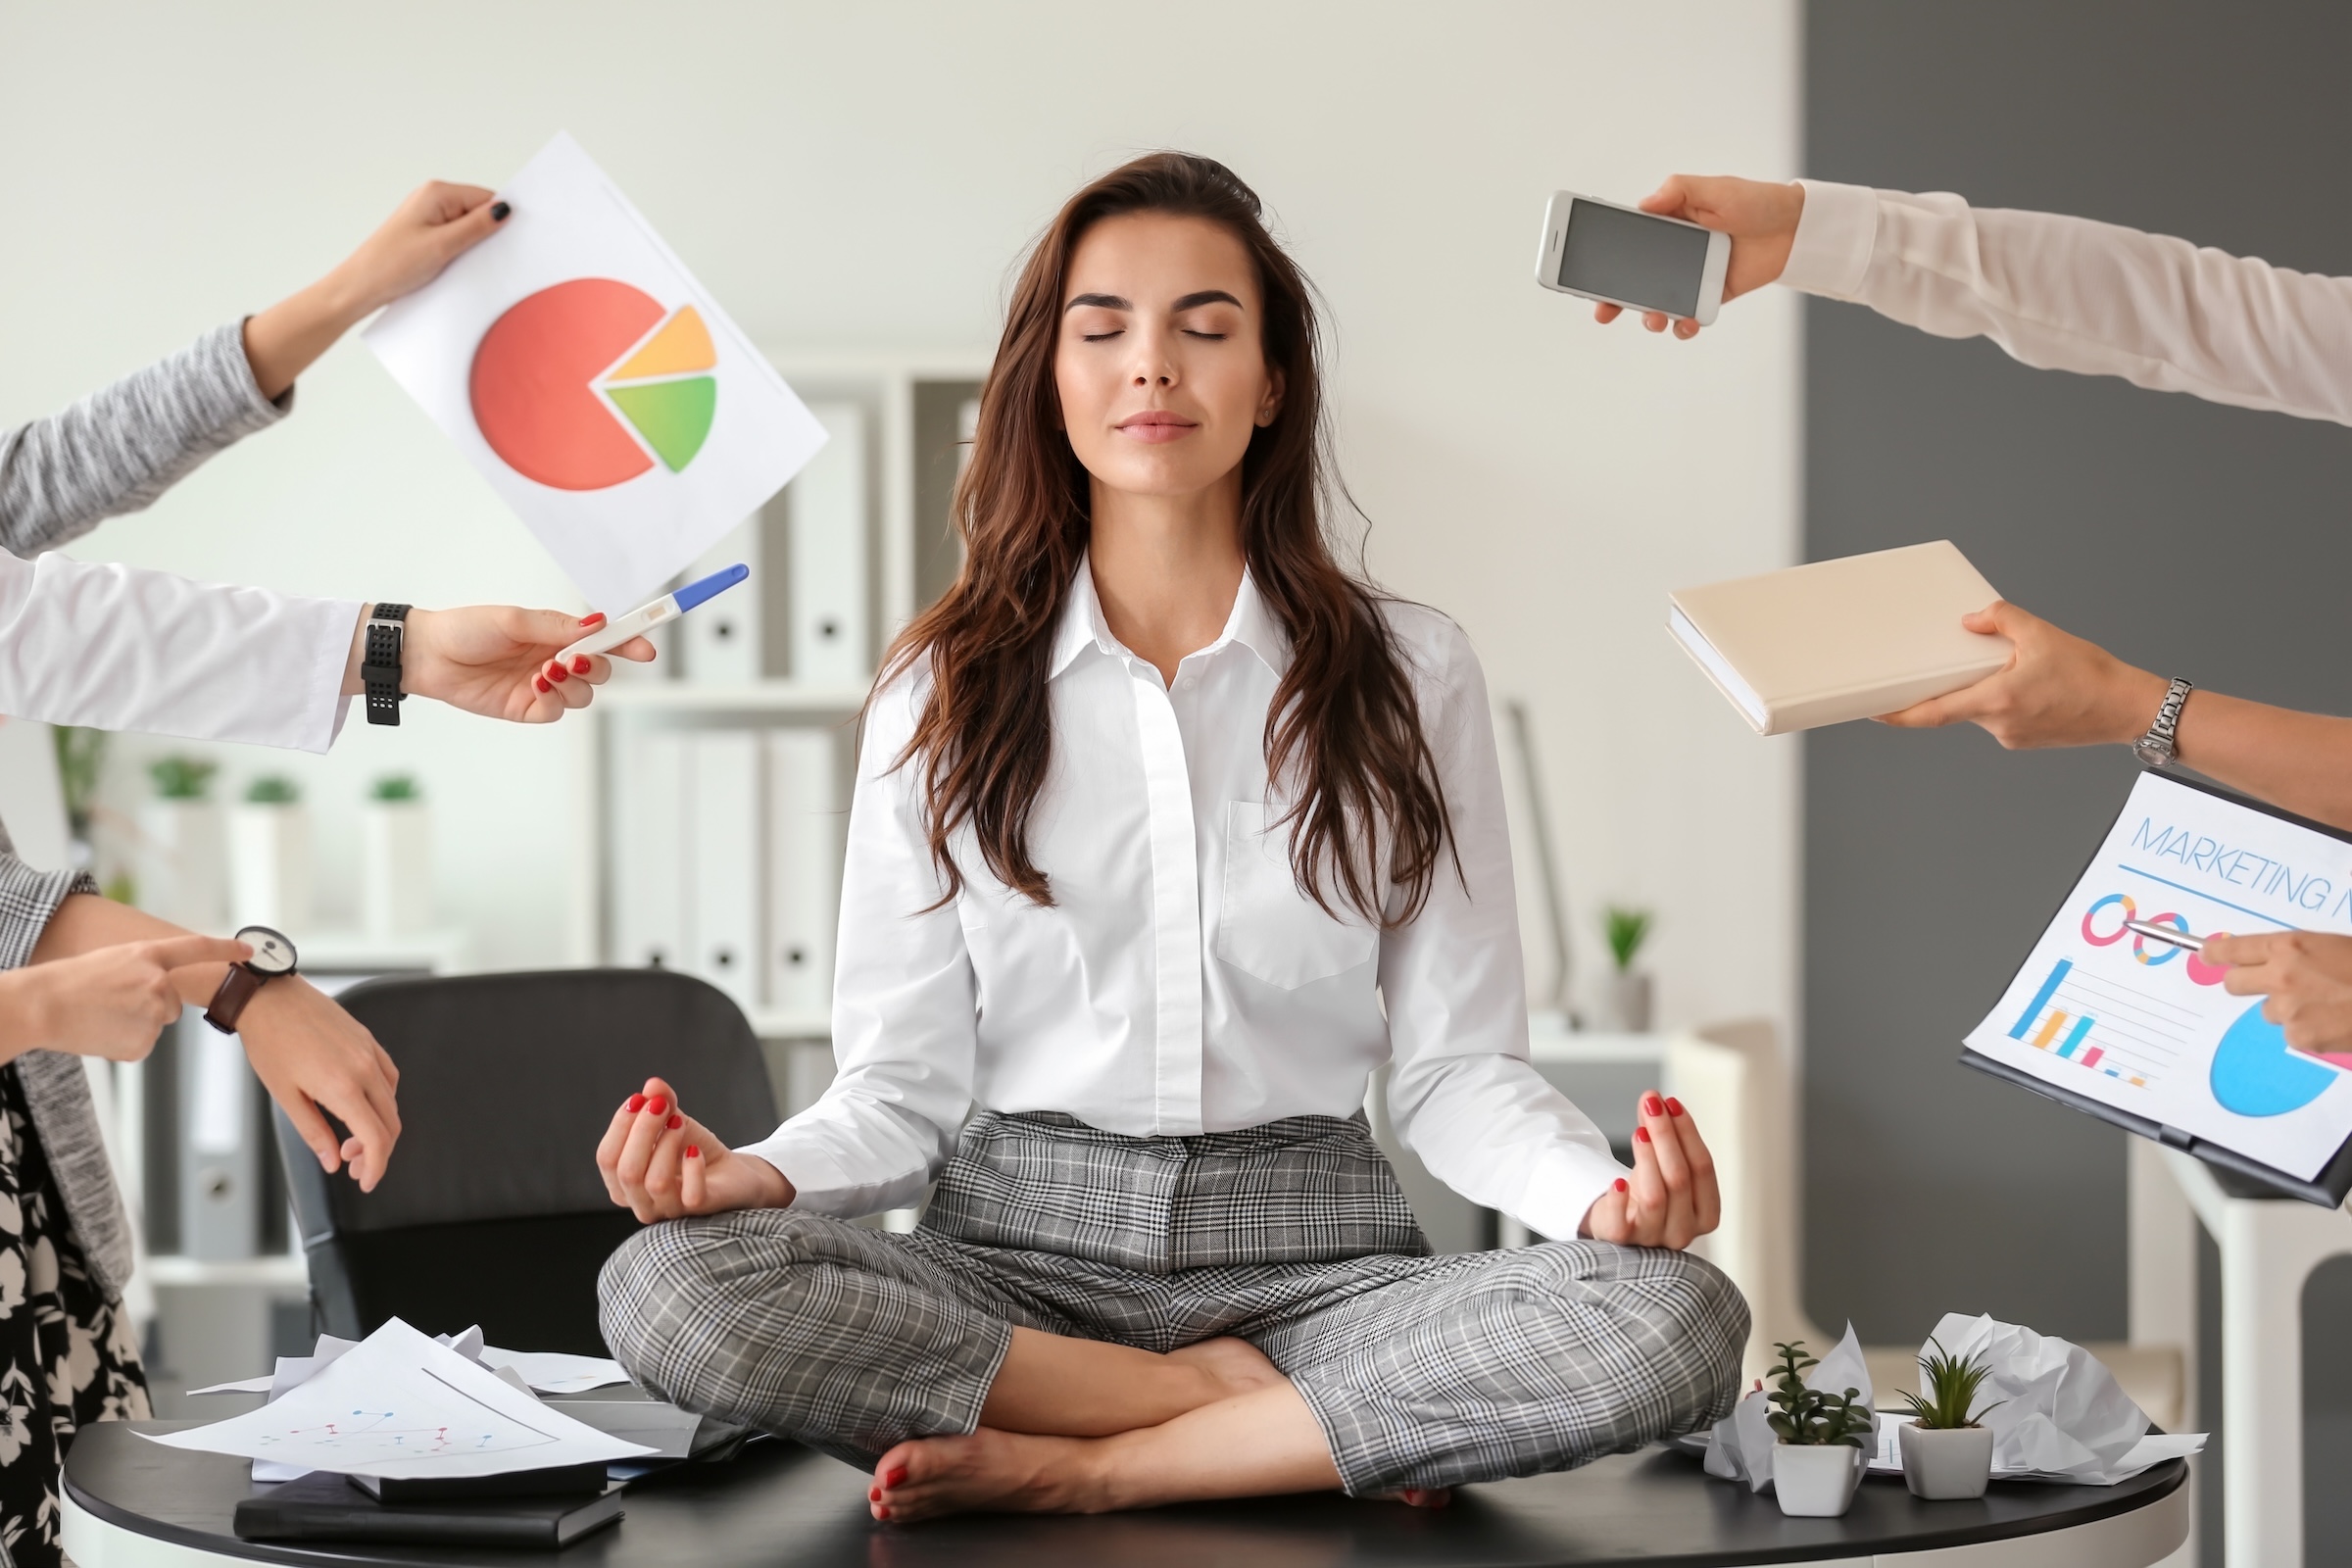 Businesswoman meditating in office to manage stress and promote heart health amidst a busy schedule.